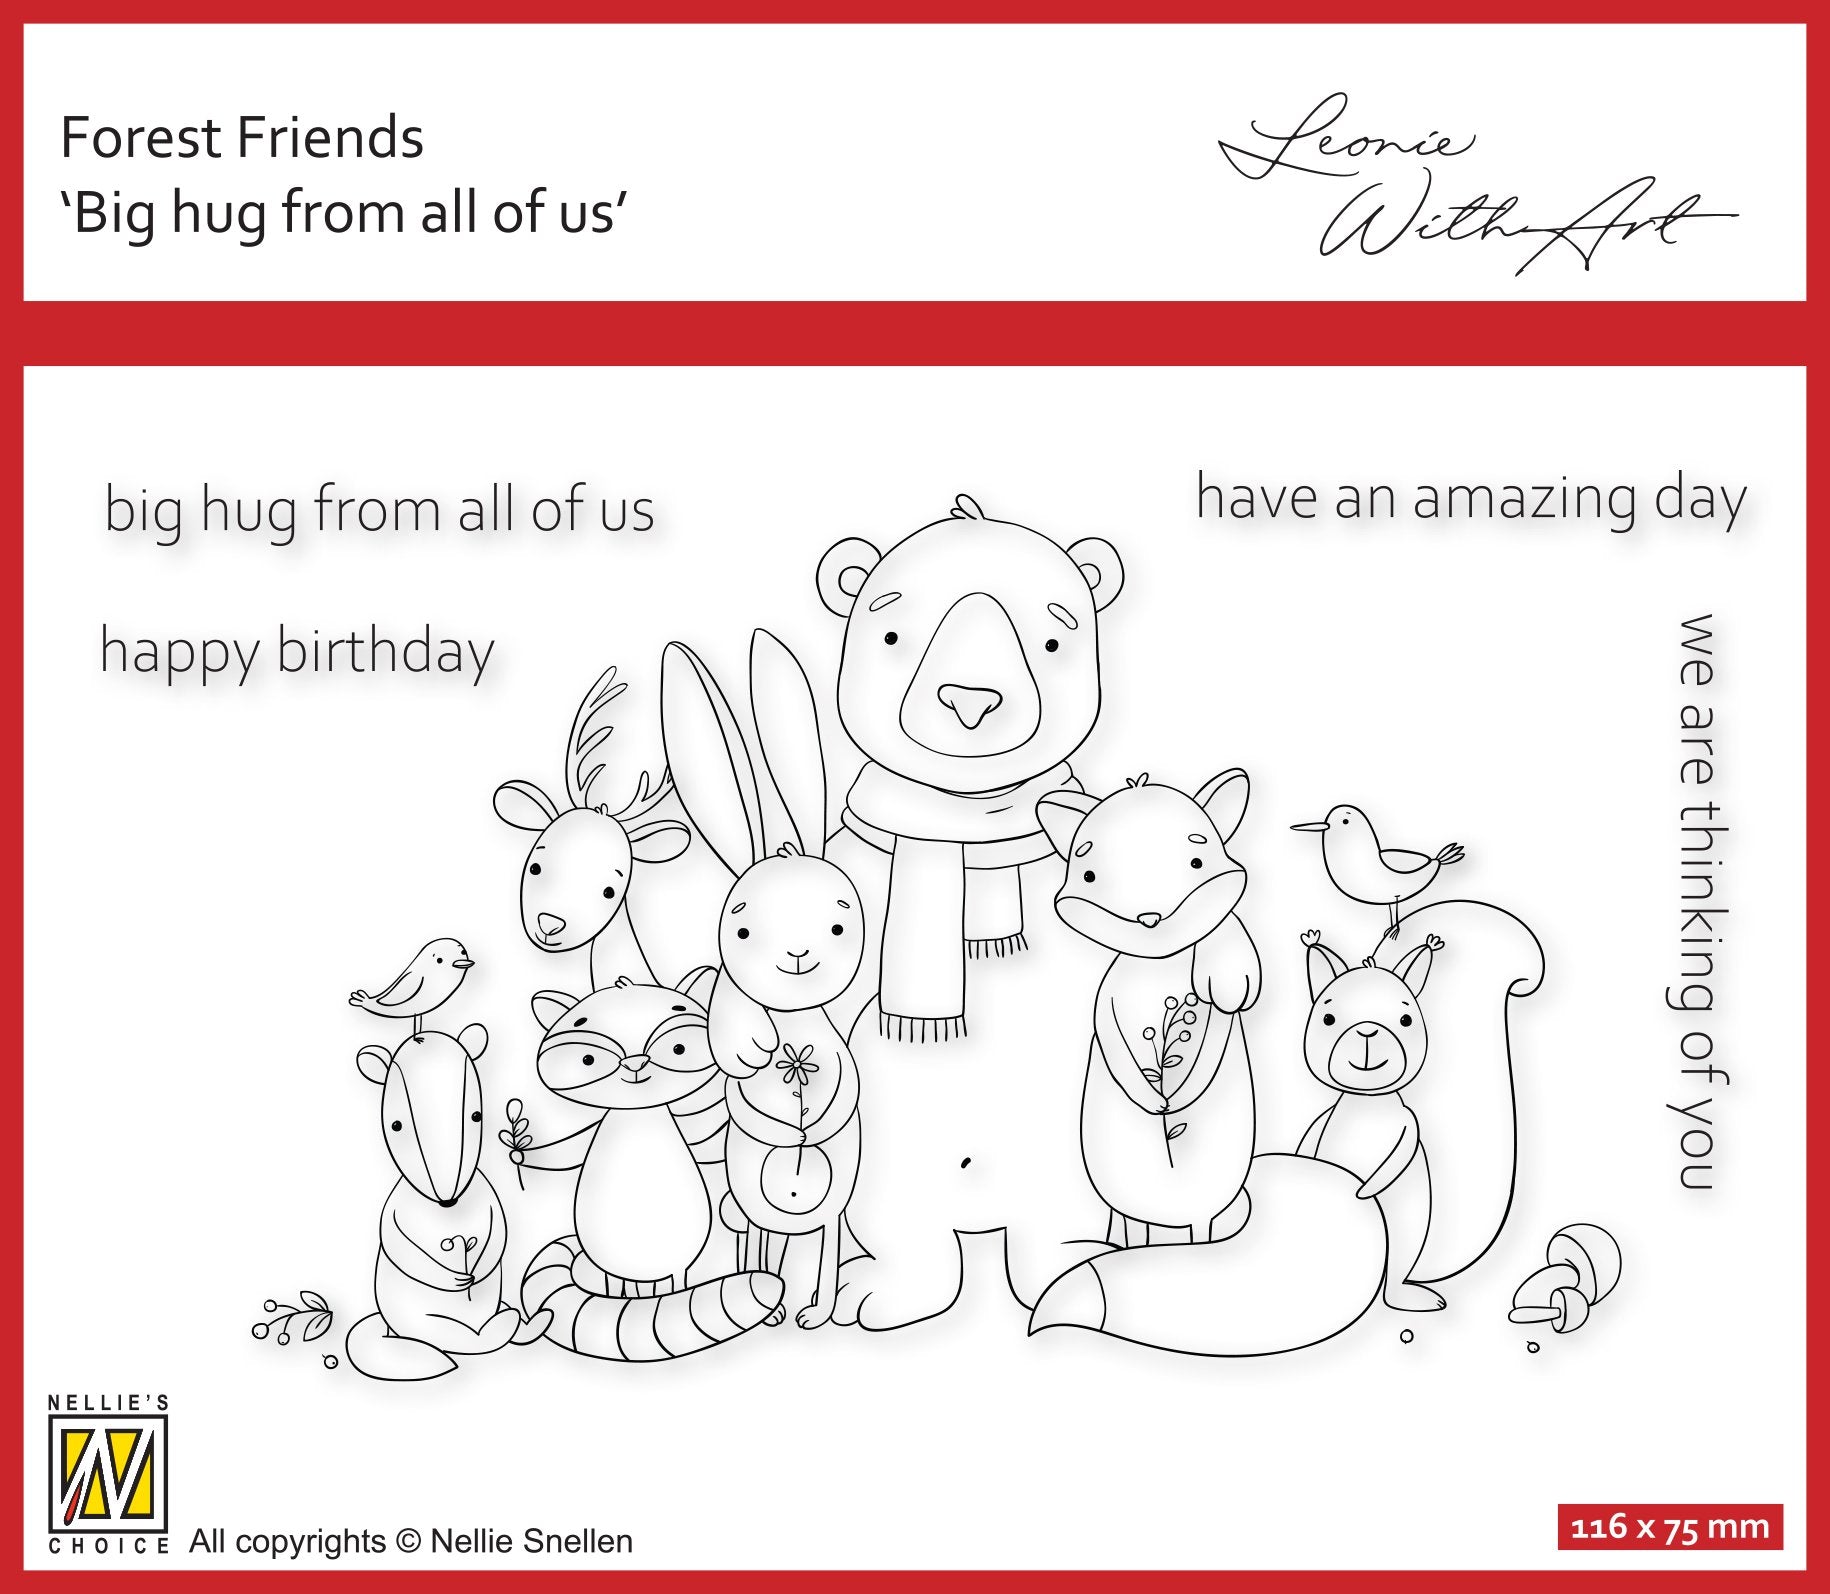 Nellie's Choice Clear Stamp Forest Friends-Big Hug From All Of Us